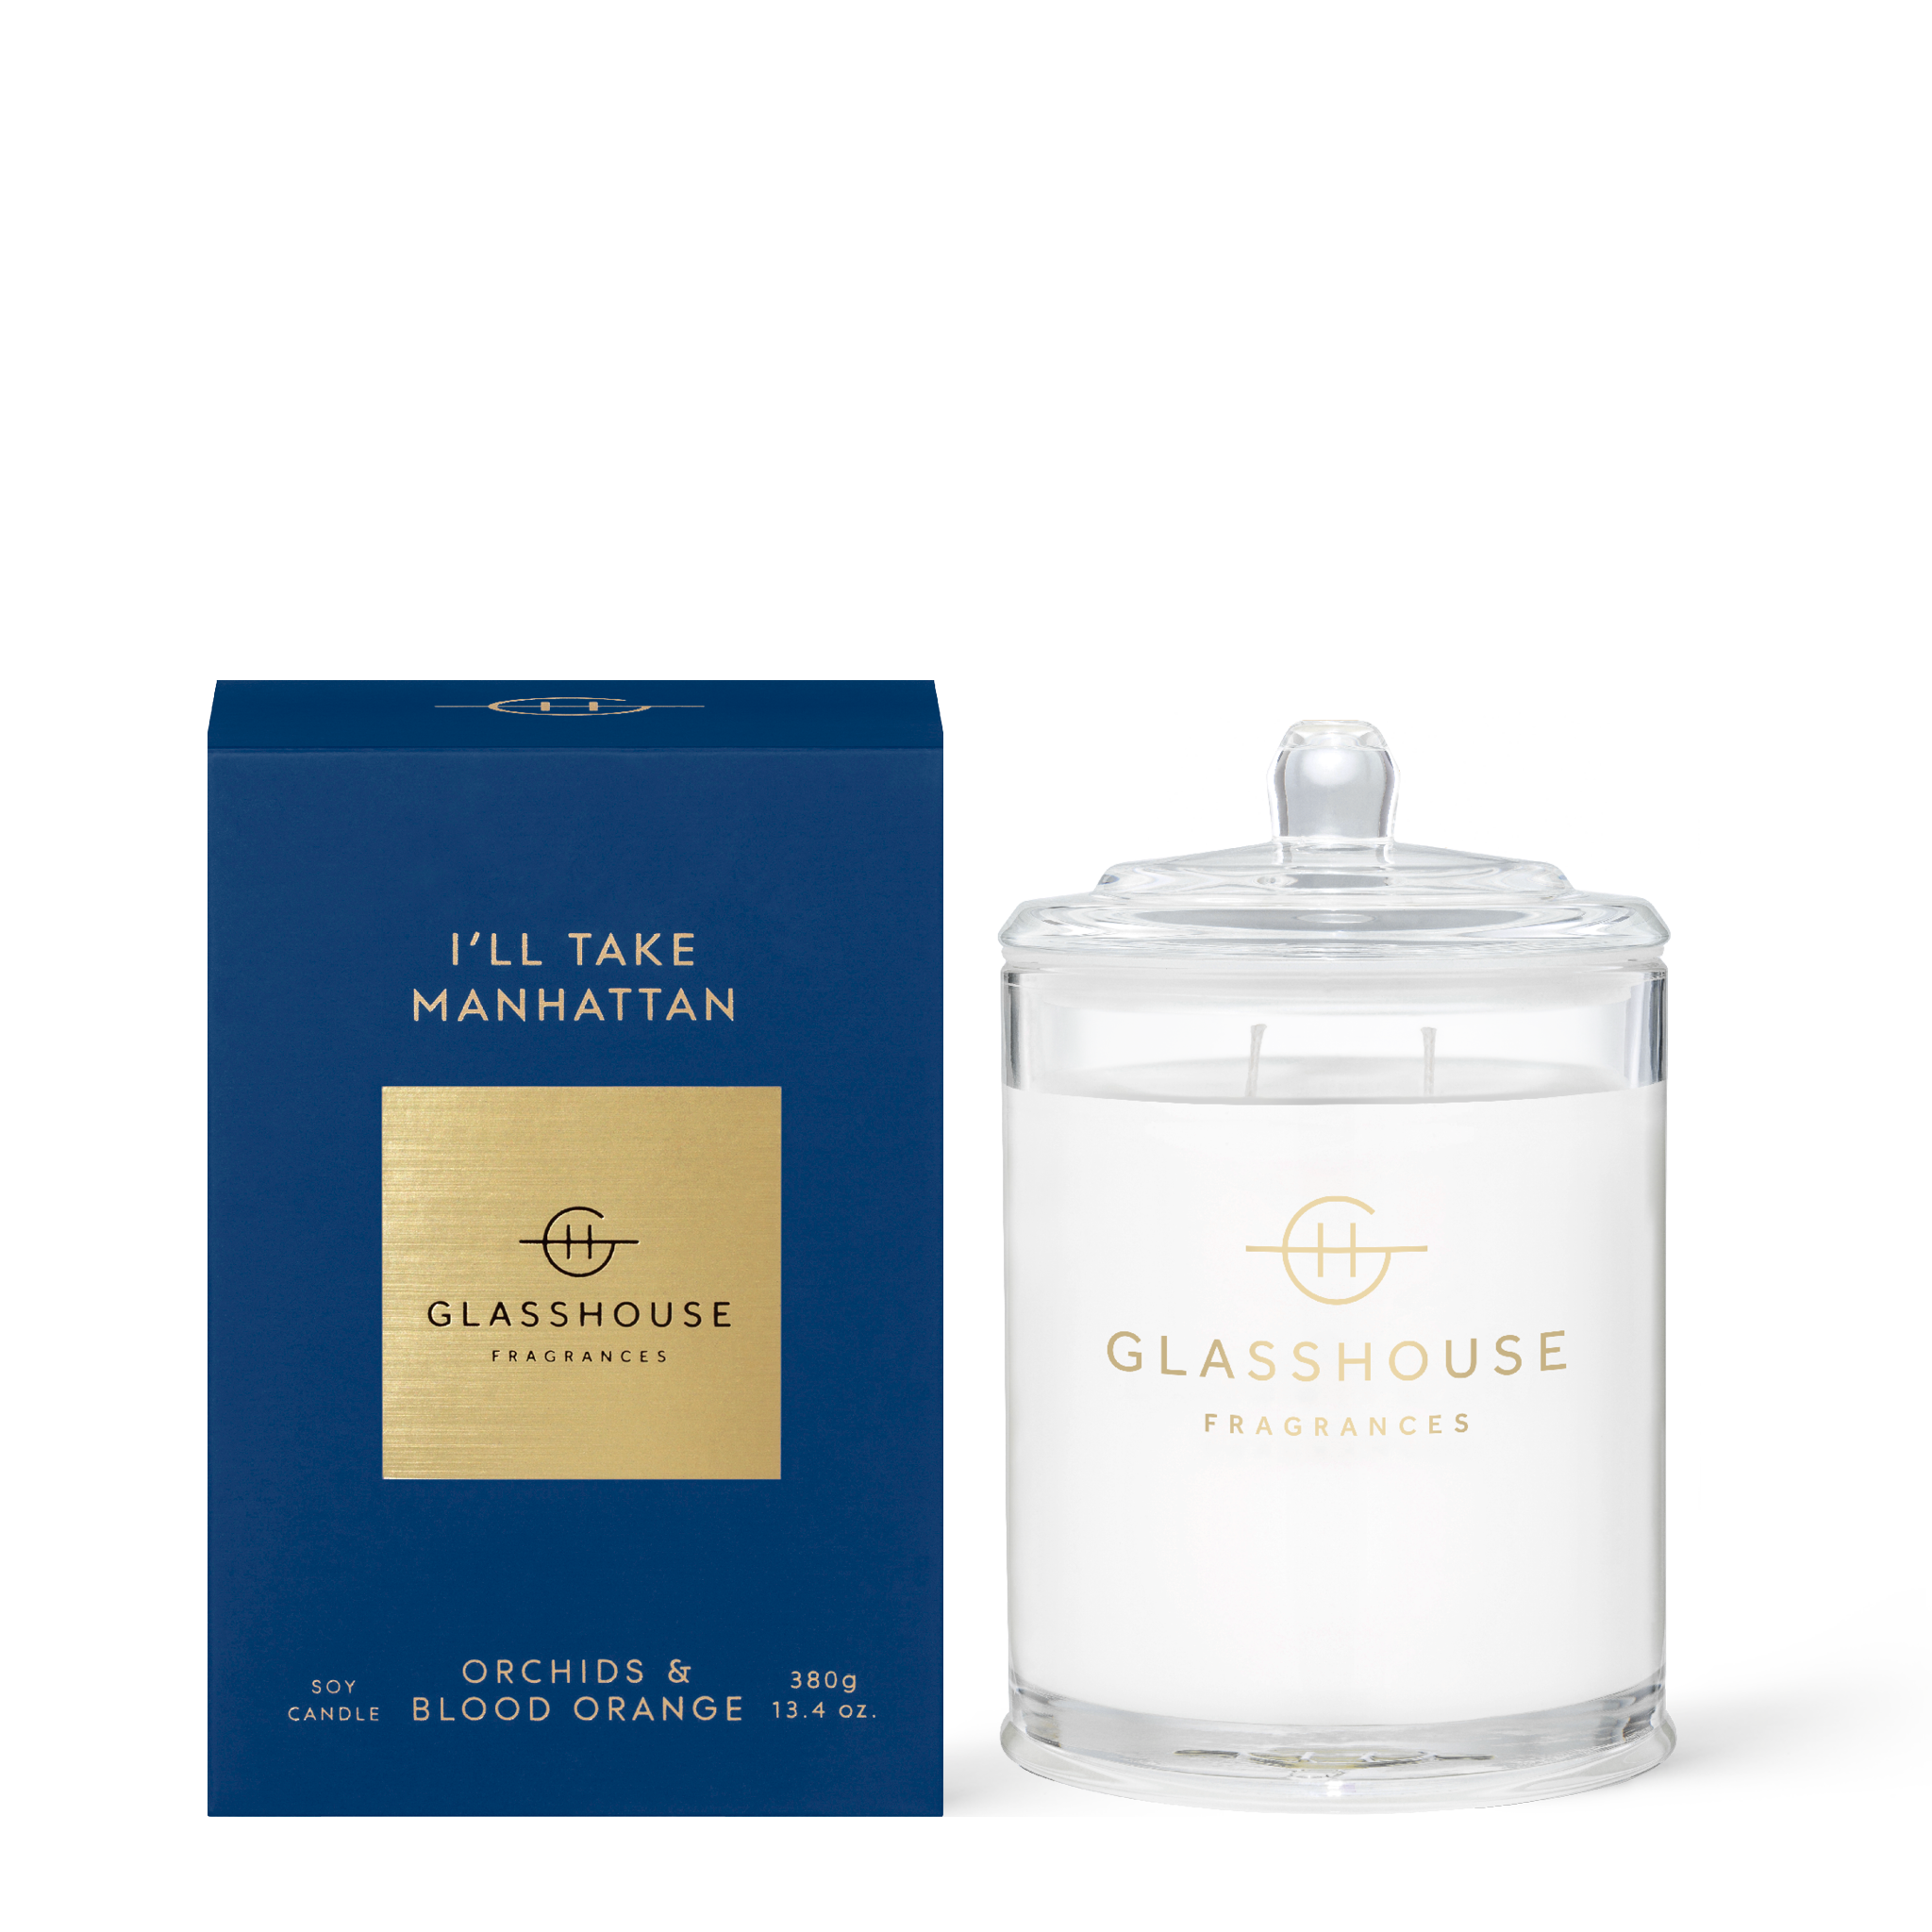 Glasshouse Fragrances I'll Take Manhattan Orchids and Blood Orange  380g Soy Candle with box